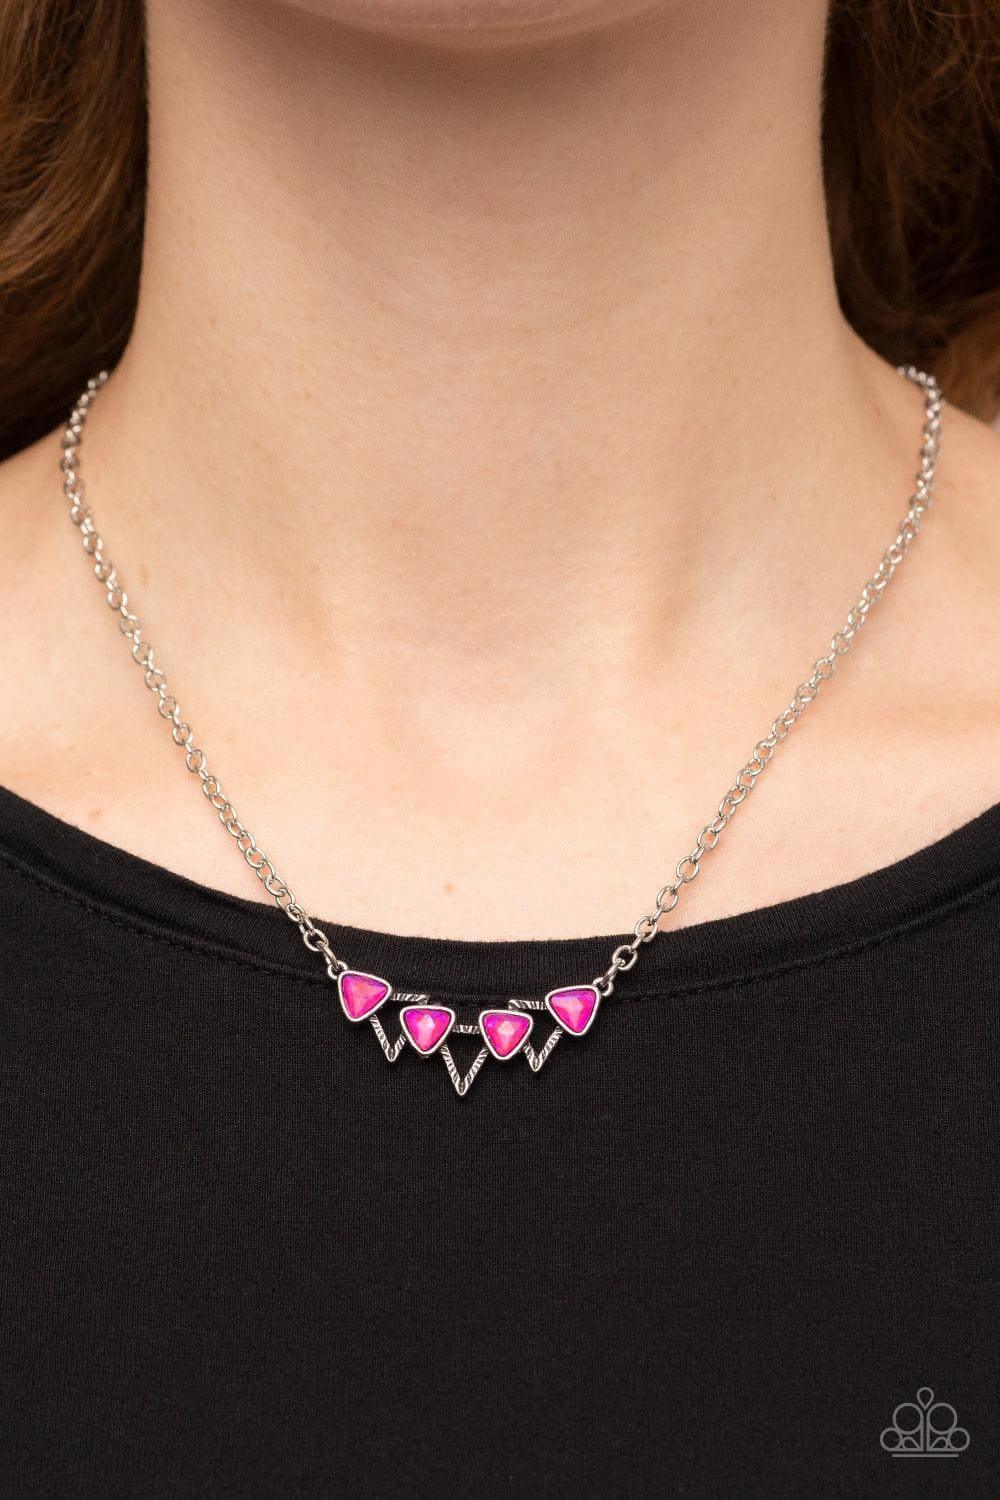 Paparazzi Accessories - Pyramid Prowl - Pink Necklace - Bling by JessieK